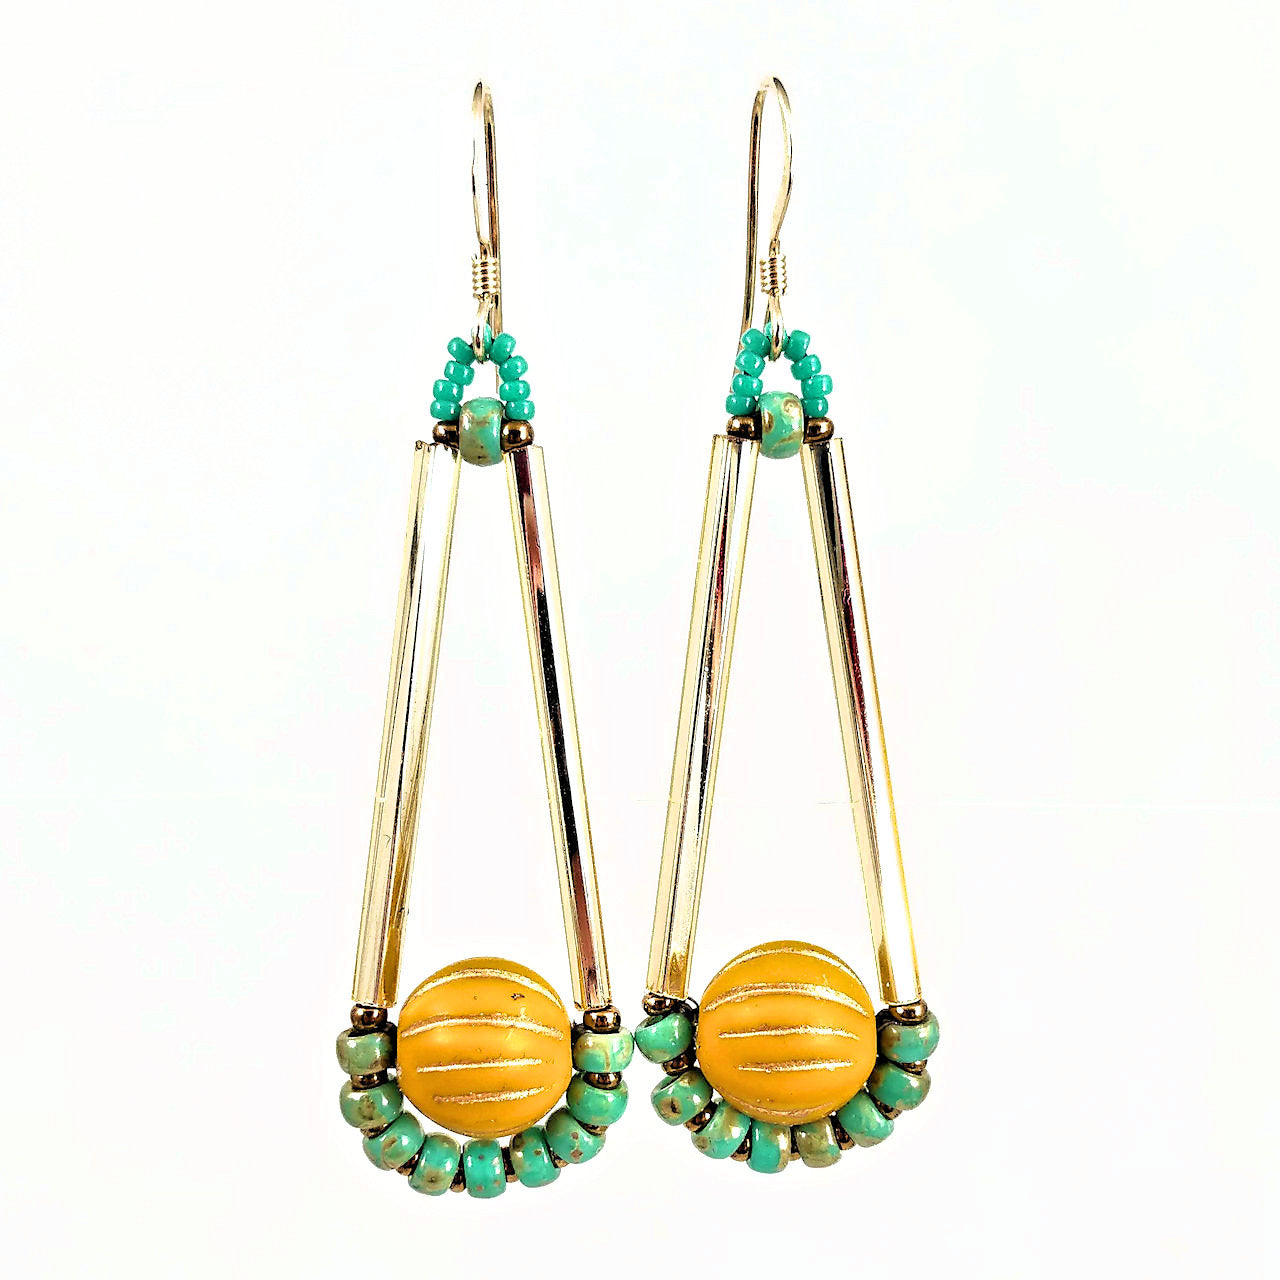 Long gold, turquoise and mustard earrings in an elongated teardrop shape against a white background. The earrings have gold ear wires. The upper part of the earring is formed by two shiny gold tubes, At the bottom is a round mustard yellow bead with gold lines on it. Around the bottom of the large bead is an arc of turquoise beads alternating with gold seed beads.